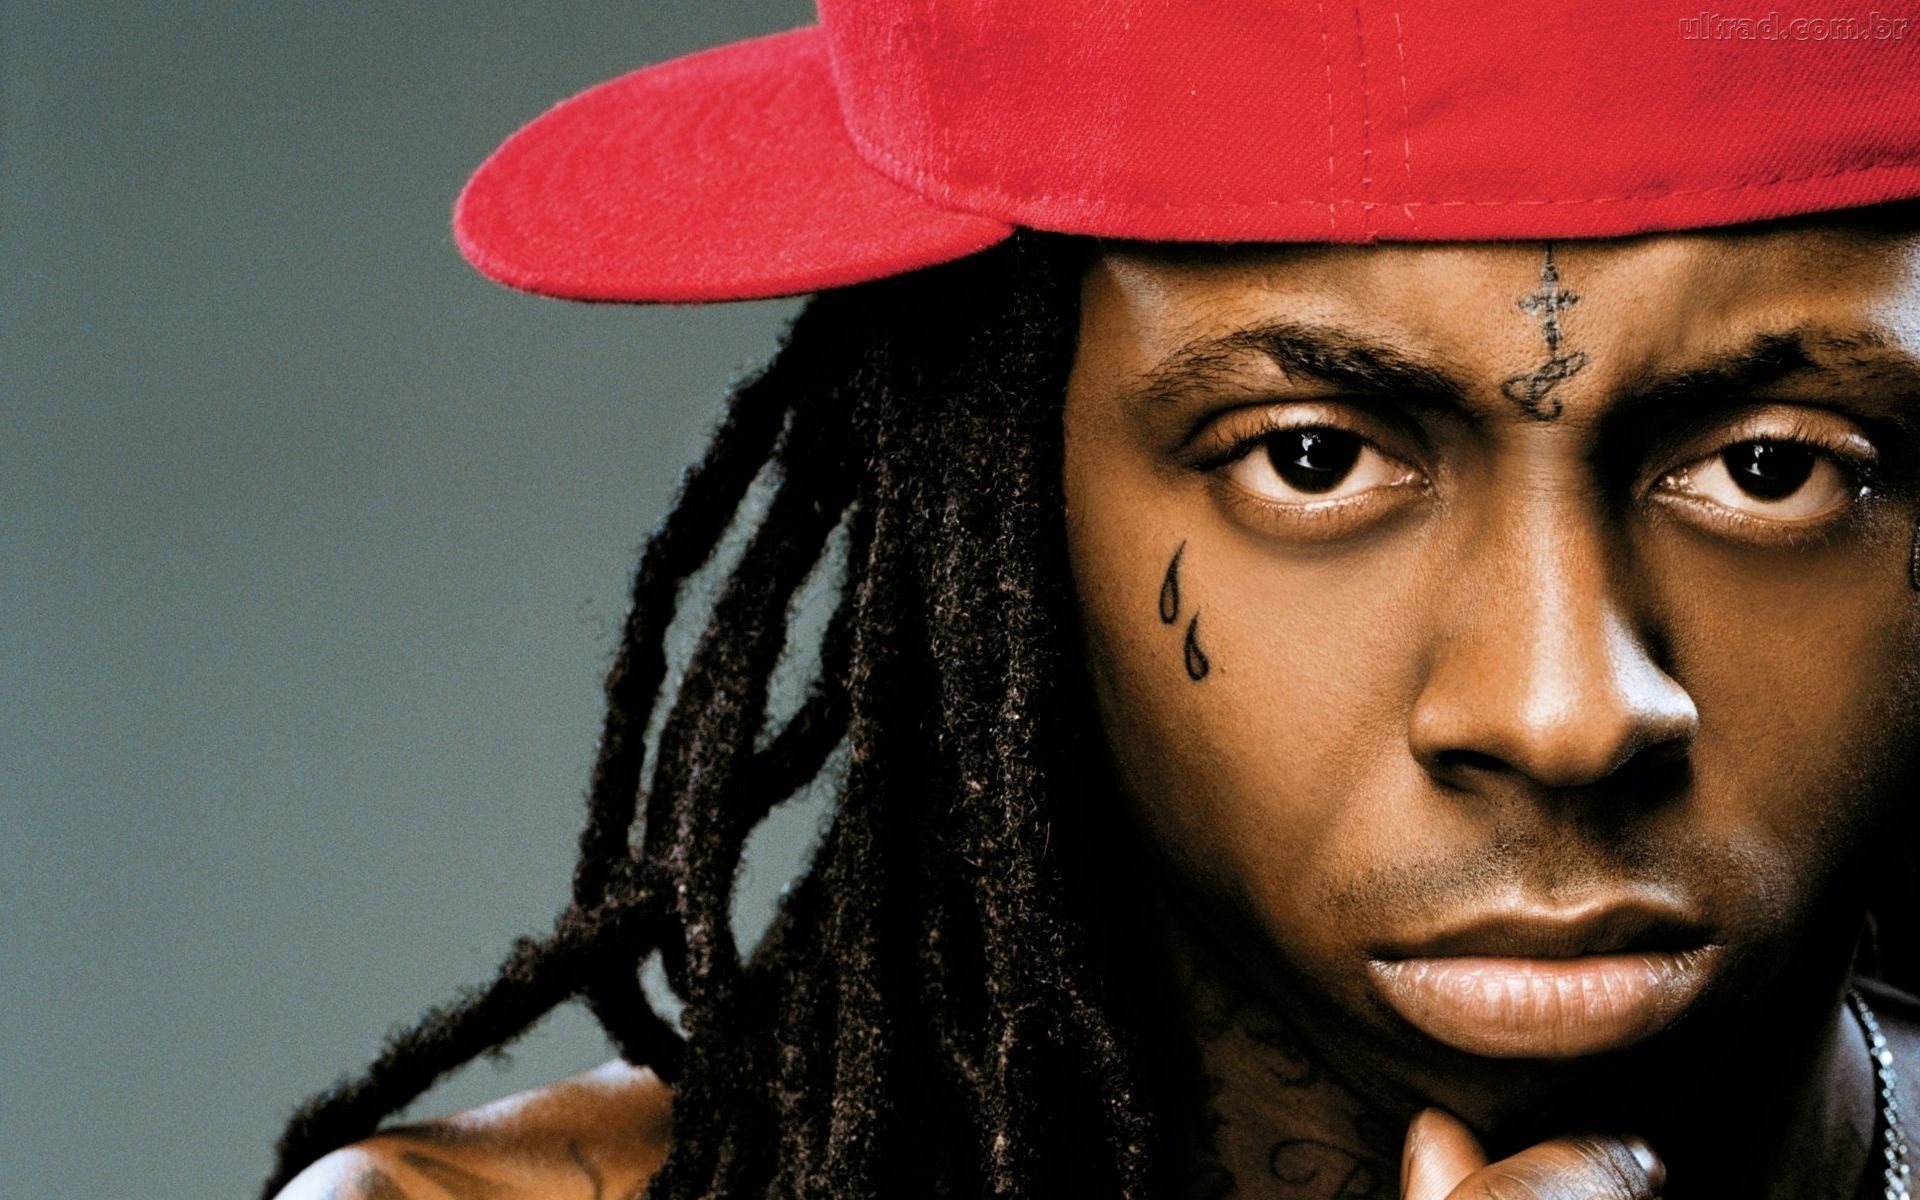 1486825 Lil Wayne wallpaper HD wallpapers backgrounds images 1920x1200